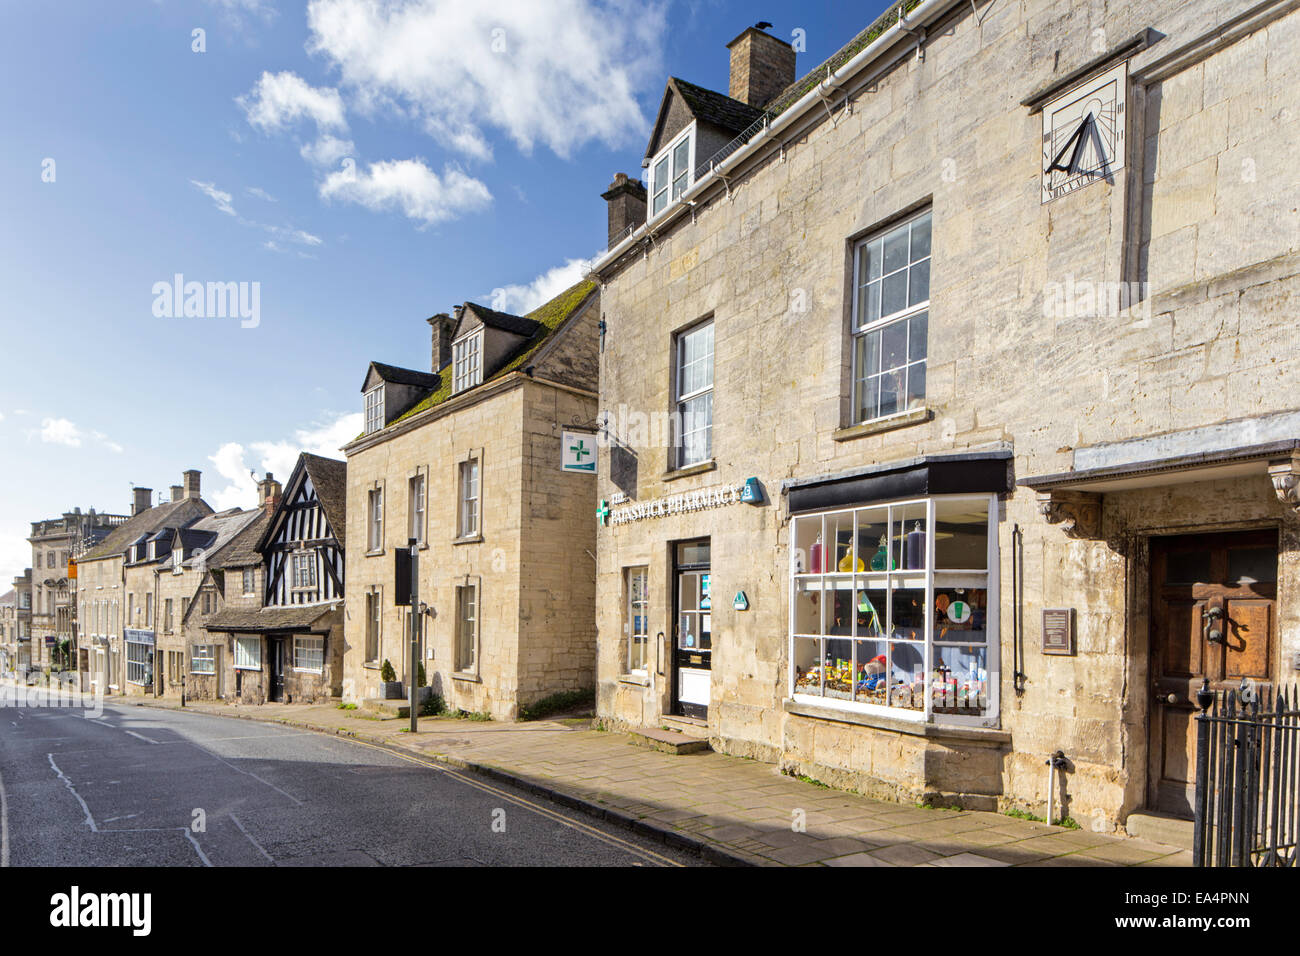 Looking down New Street towards the Old Post Office, Painswick, Gloucestershire, England, UK Stock Photo